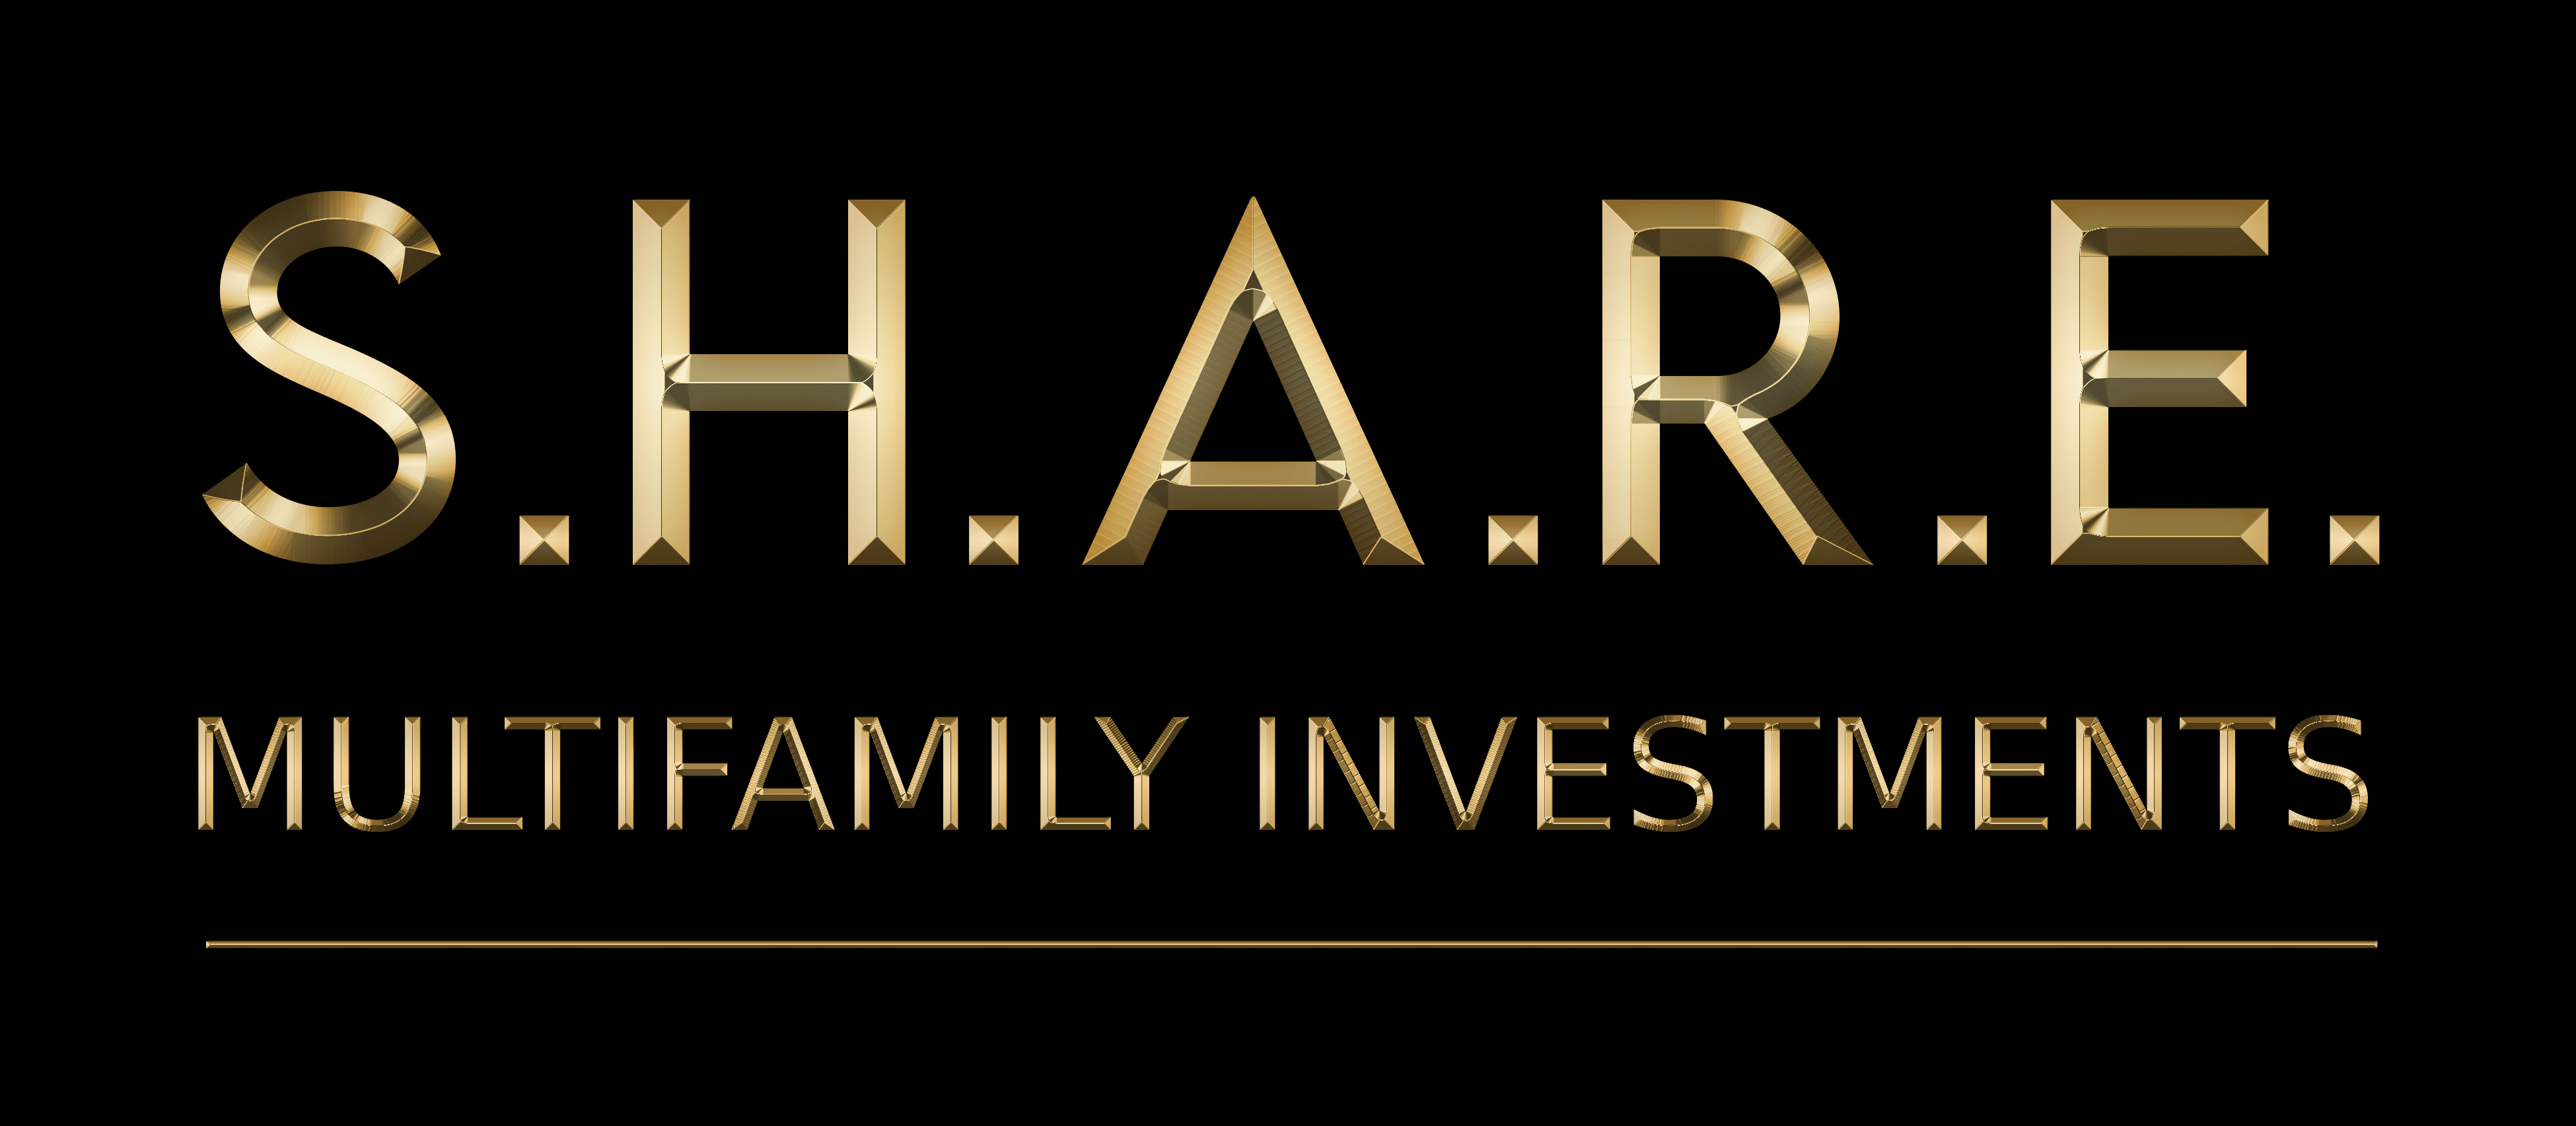 S.H.A.R.E. MULTIFAMILY INVESTMENTS